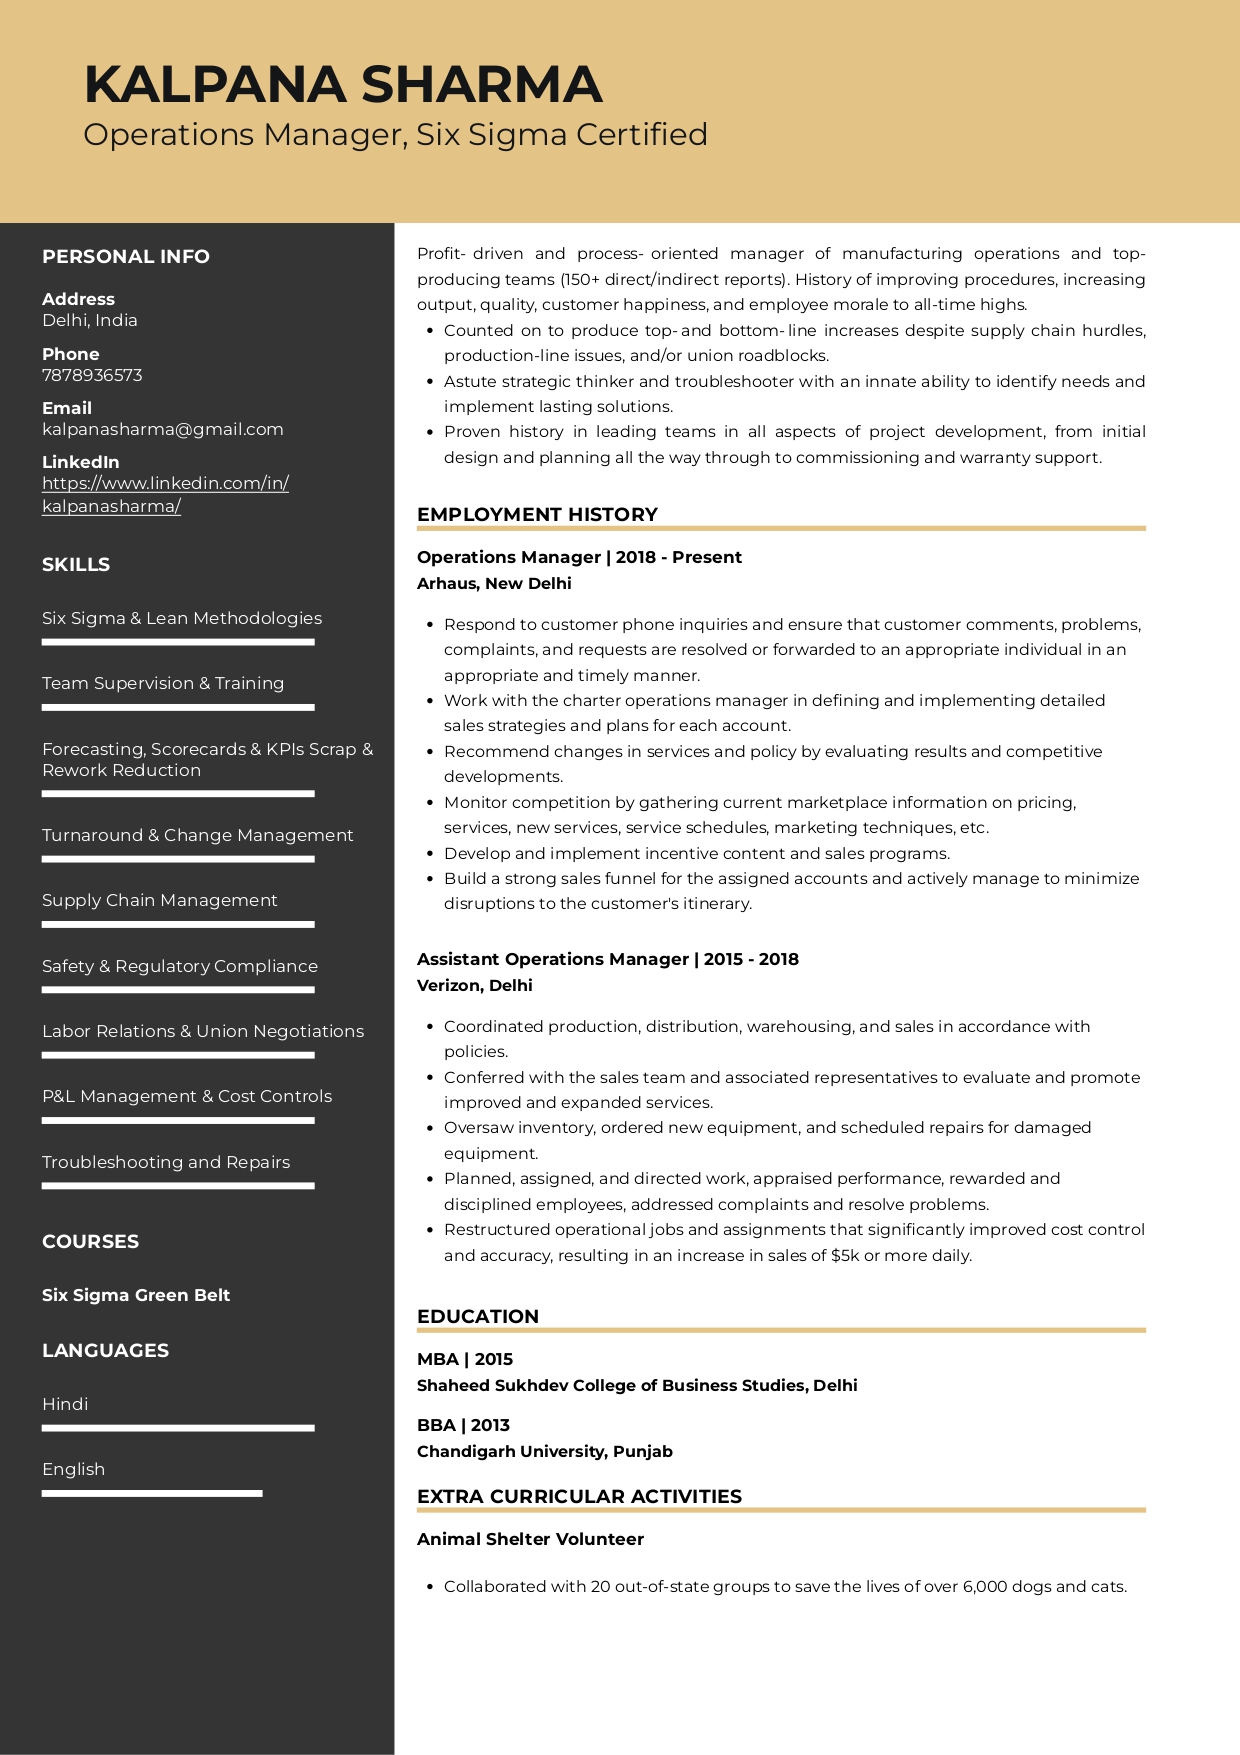 Sample Resume of Operations Manager 1 | Free Resume Templates & Samples on Resumod.co